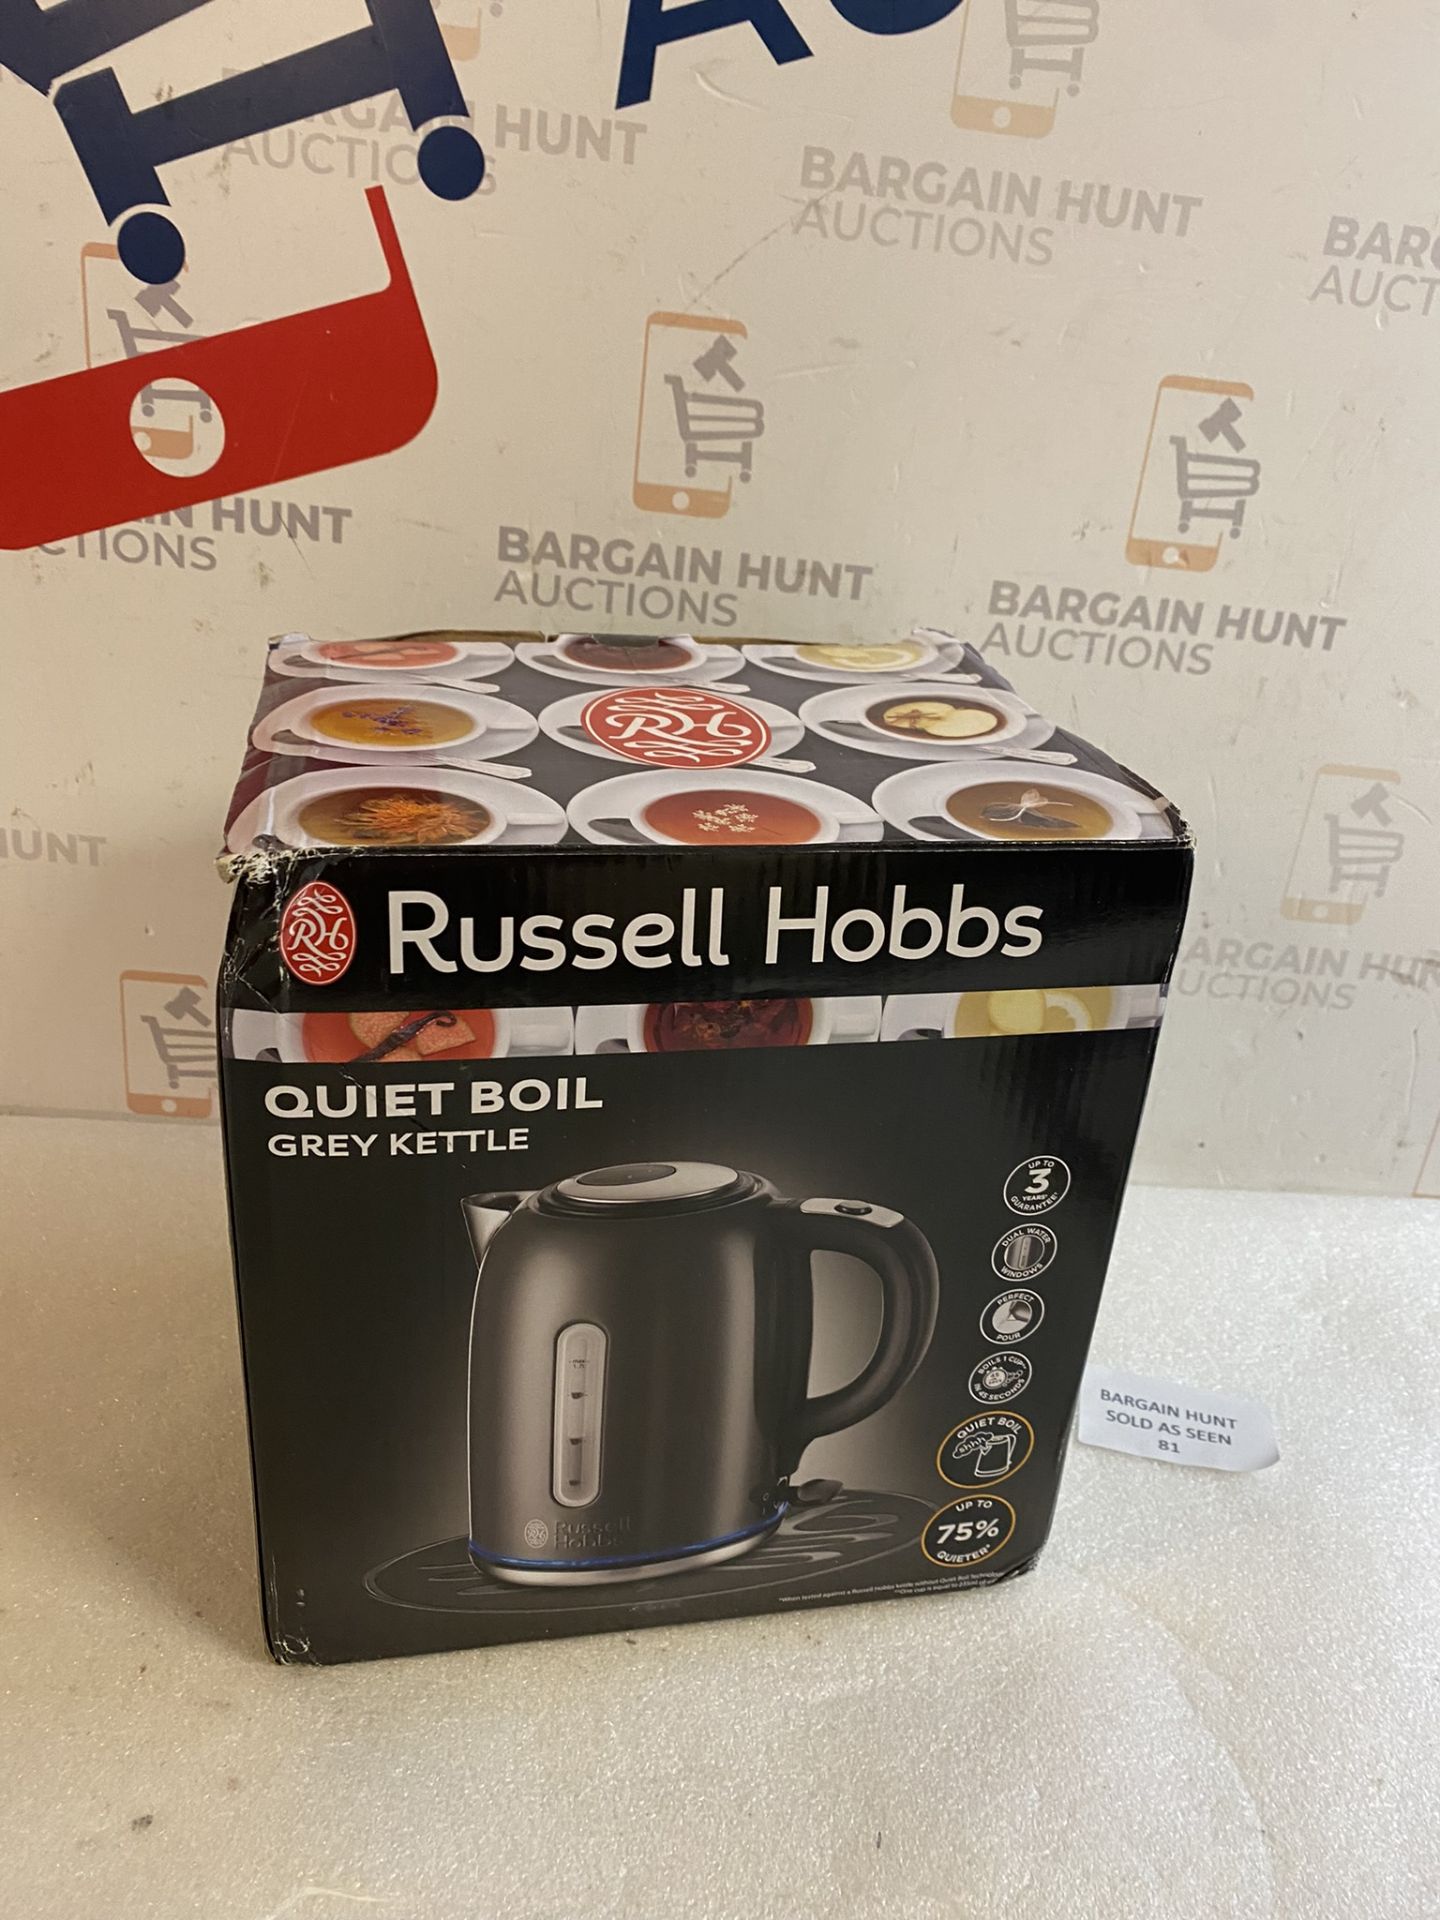 Russell Hobbs 20463 Quiet Boil Kettle RRP £38.99 - Image 2 of 2